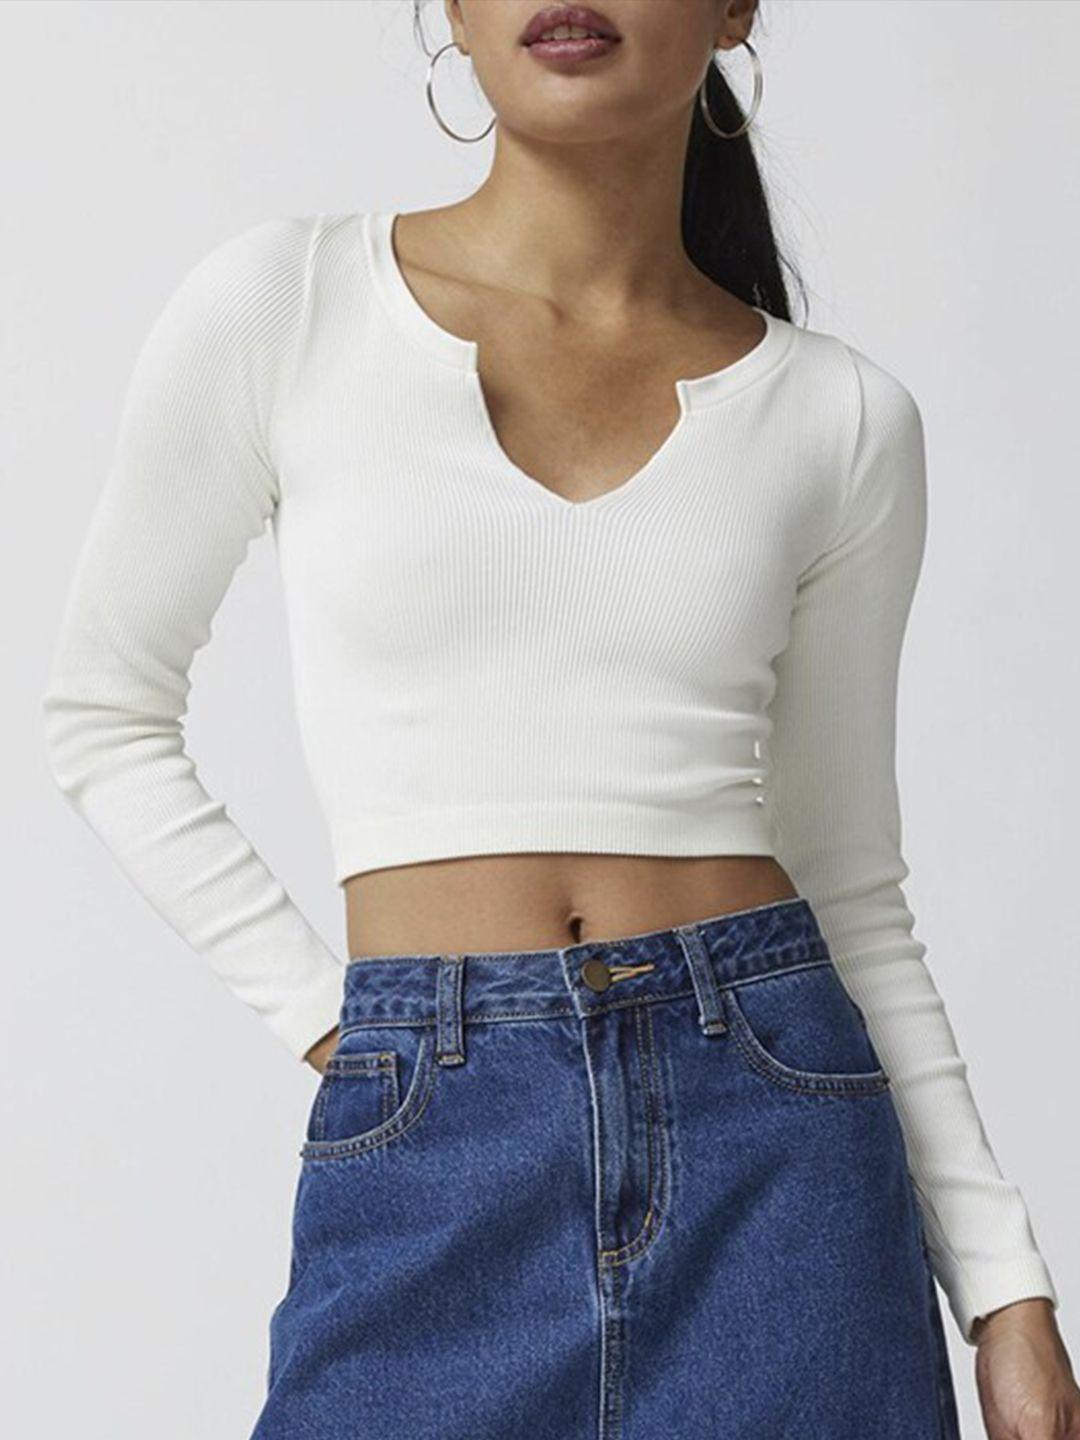 stylecast white round notched neck long sleeves crop fitted top